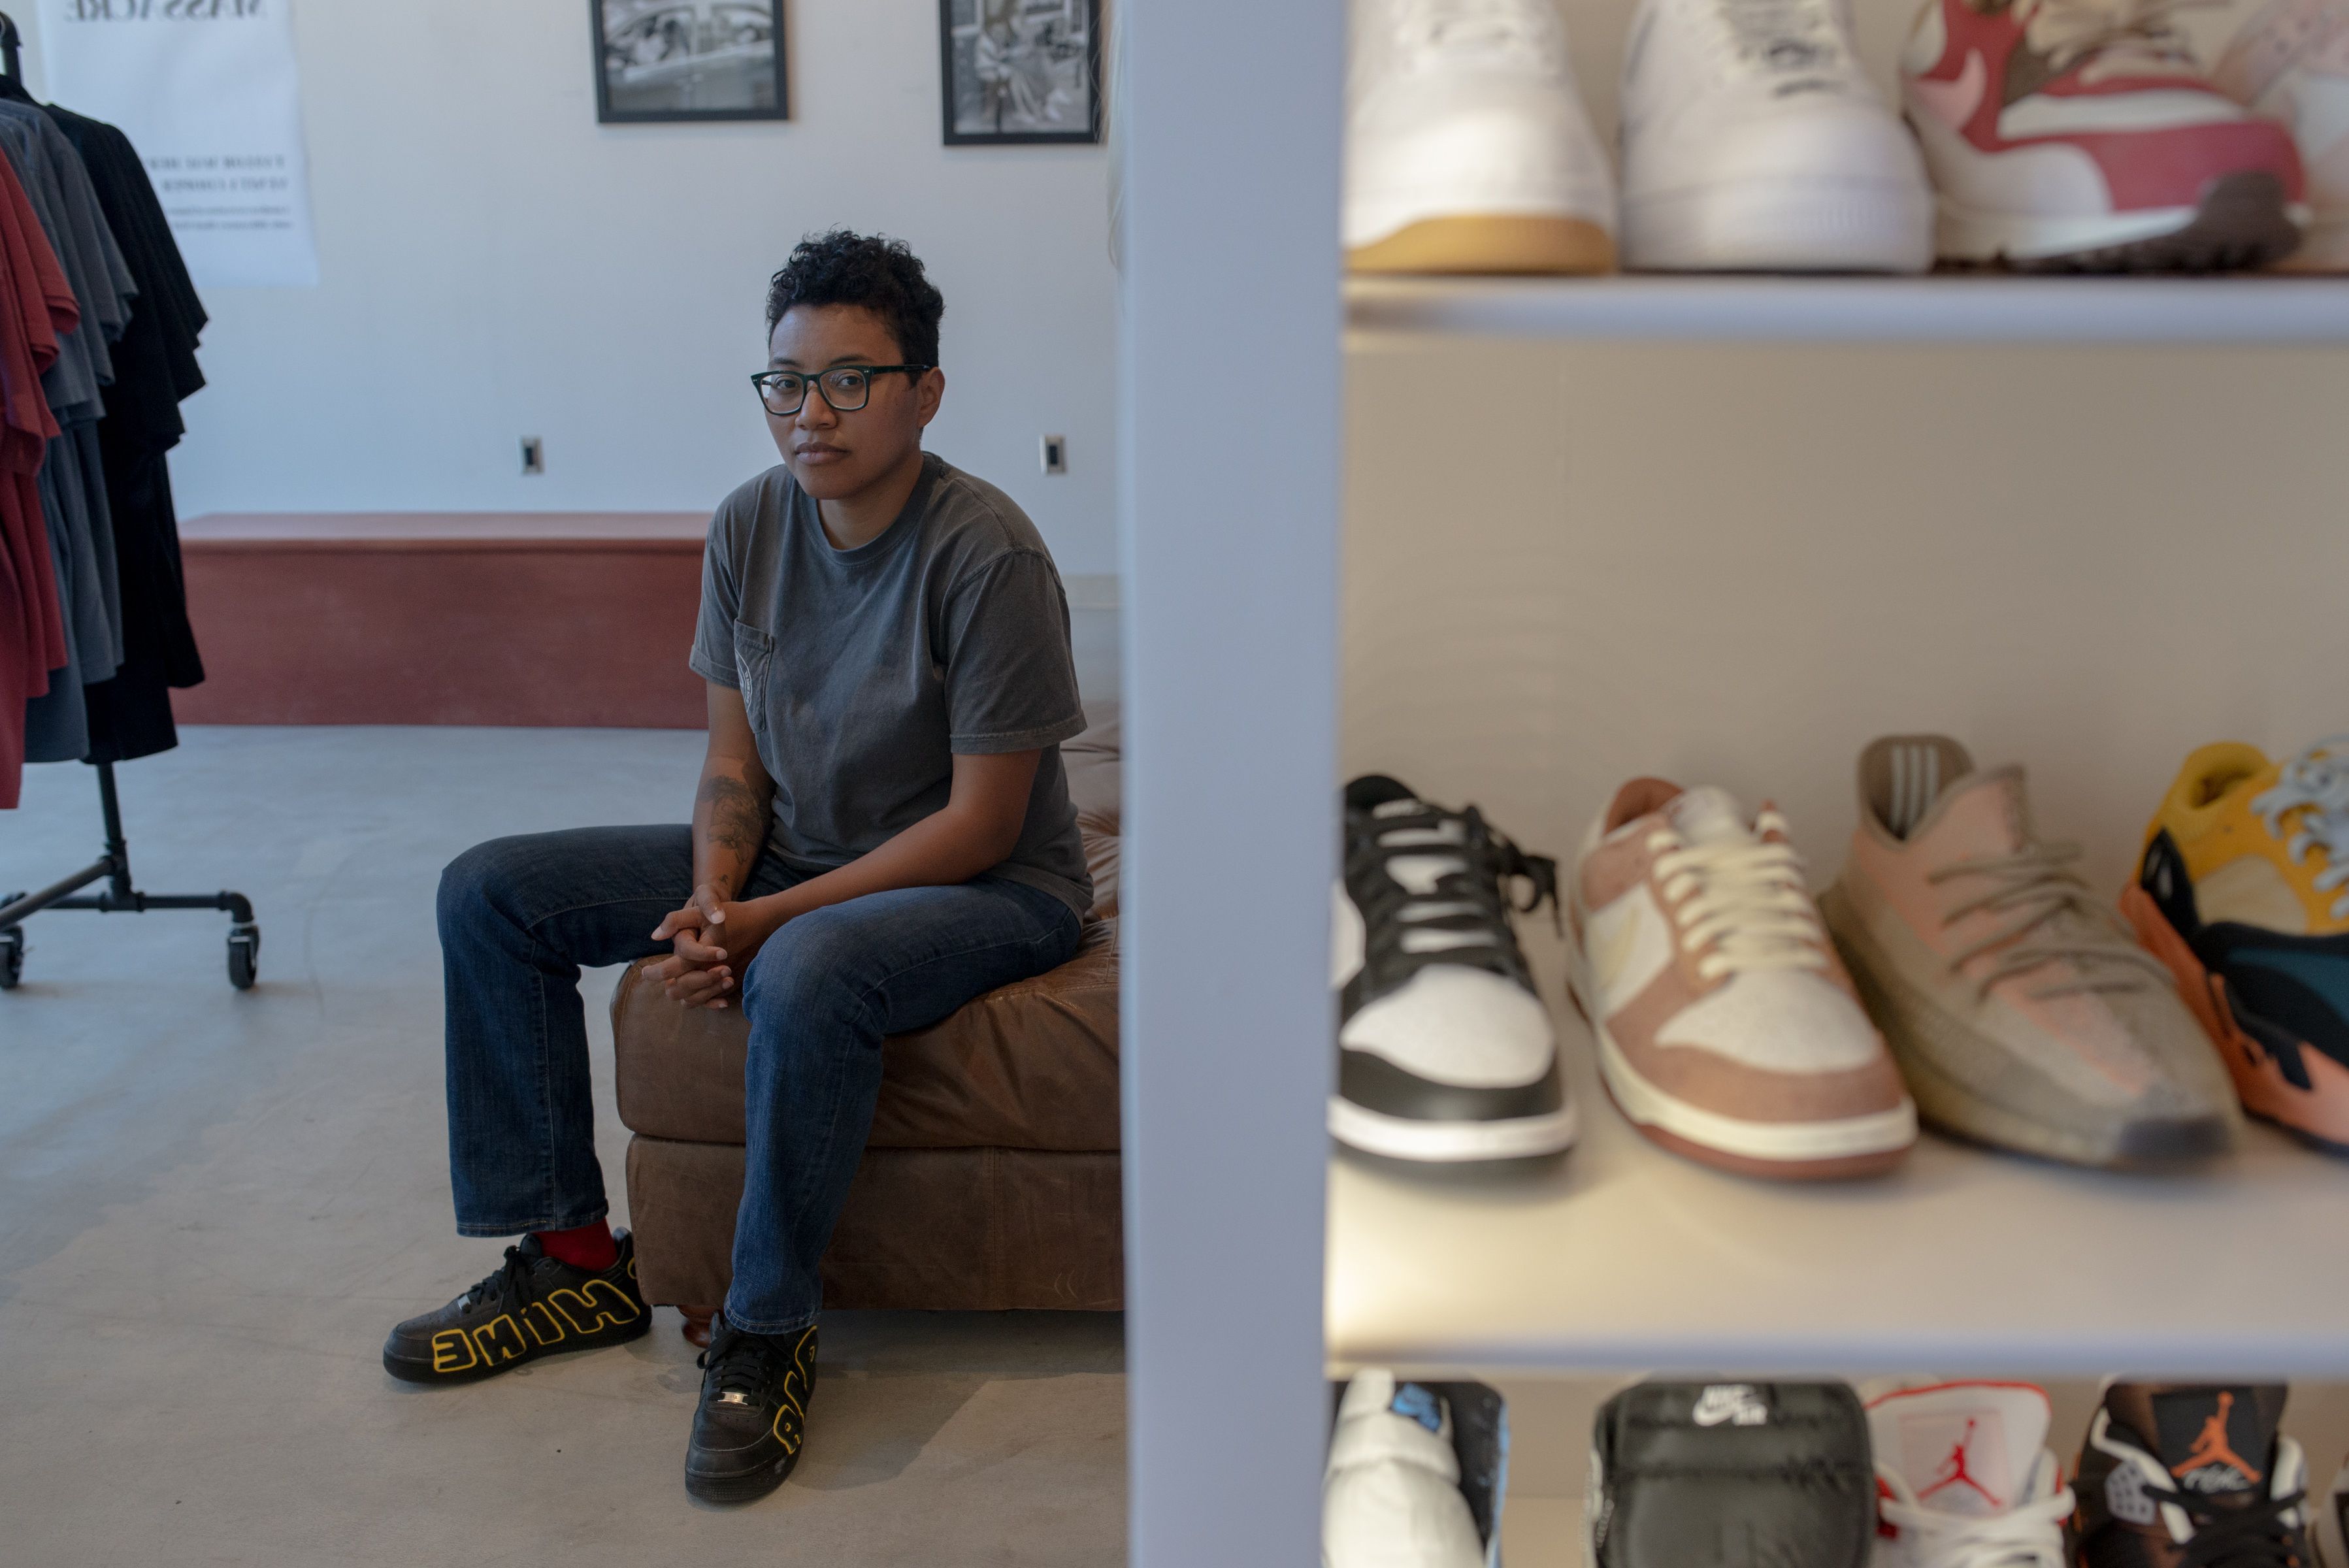 Venita Cooper poses in her store Silhouette, a high-end sneaker spot in the heart of Greenwood.